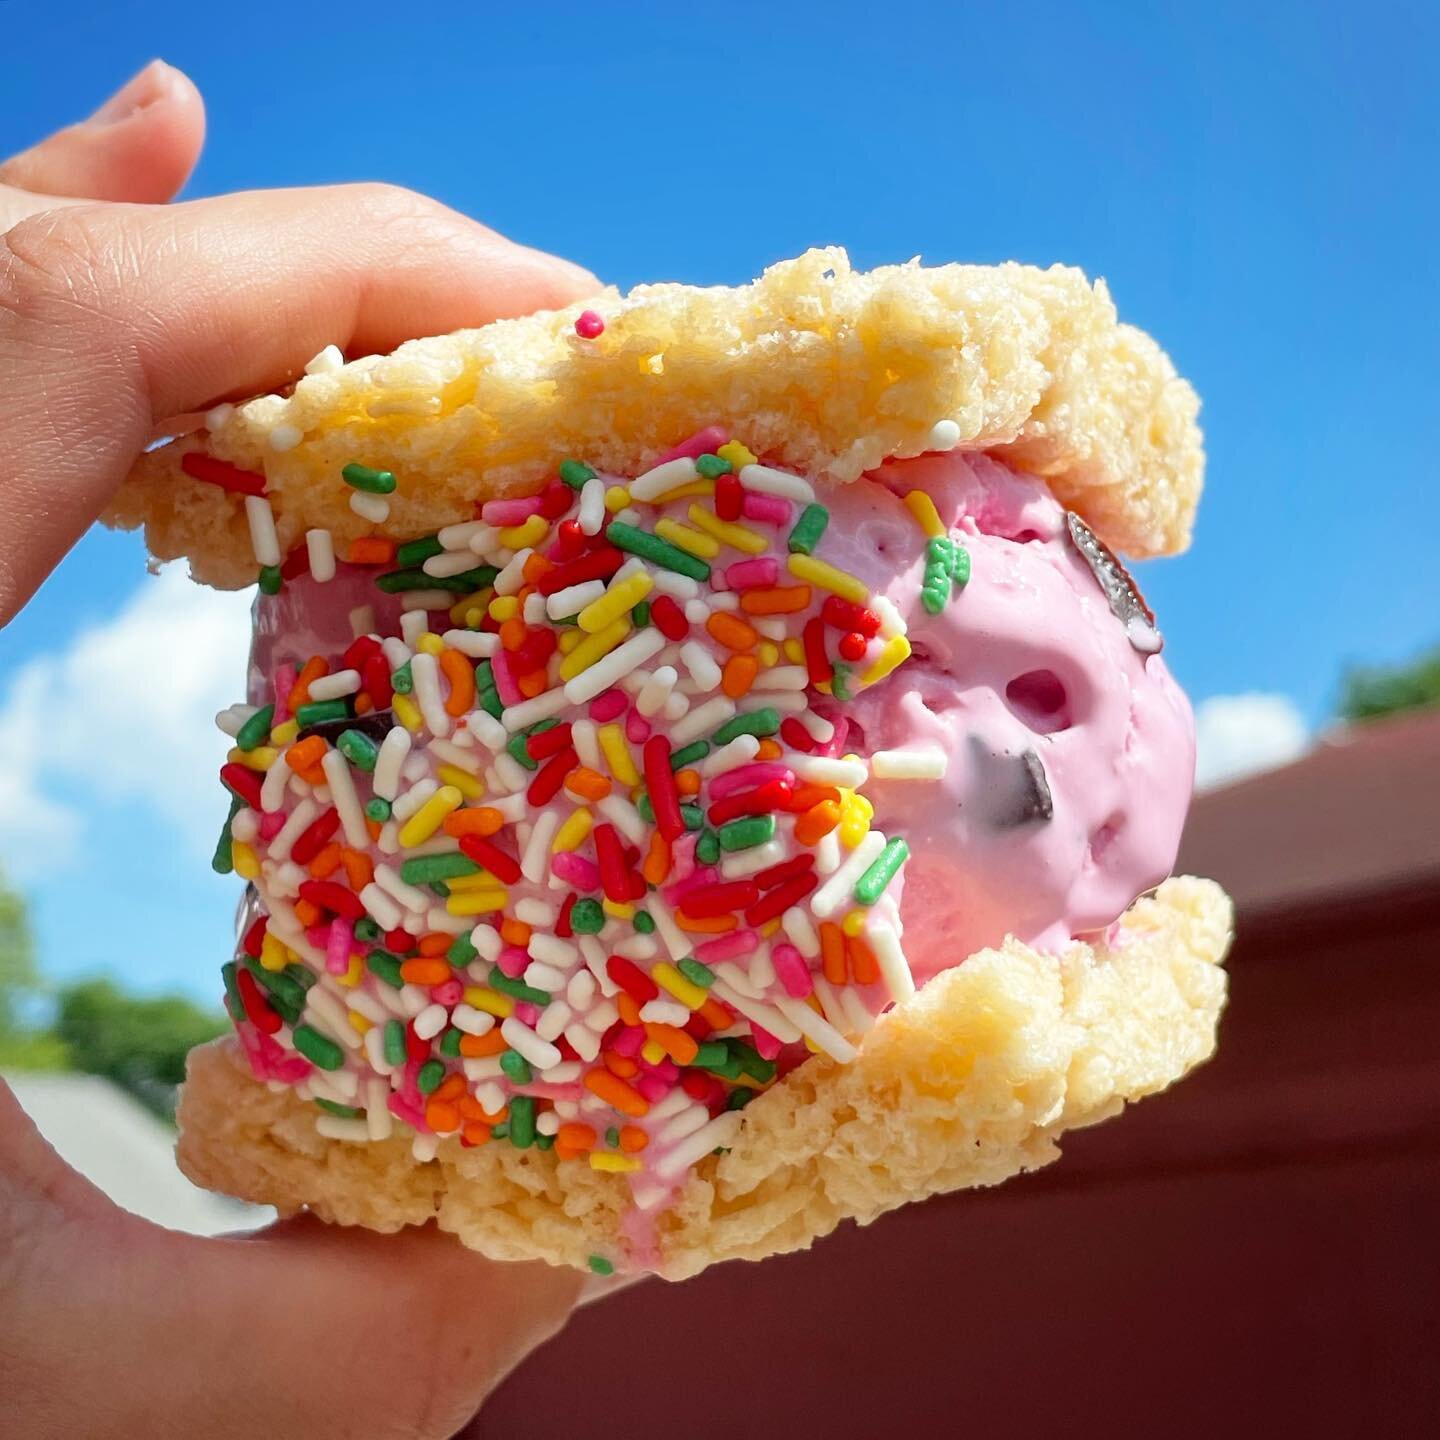 NOW ON SUMMER HOURS! Open Noon-10pm everyday! #beattheheat #nelliesicecream (Pictured: gluten free rice crispy treat with raspberry chocolate chunk and rainbow sprinkles)